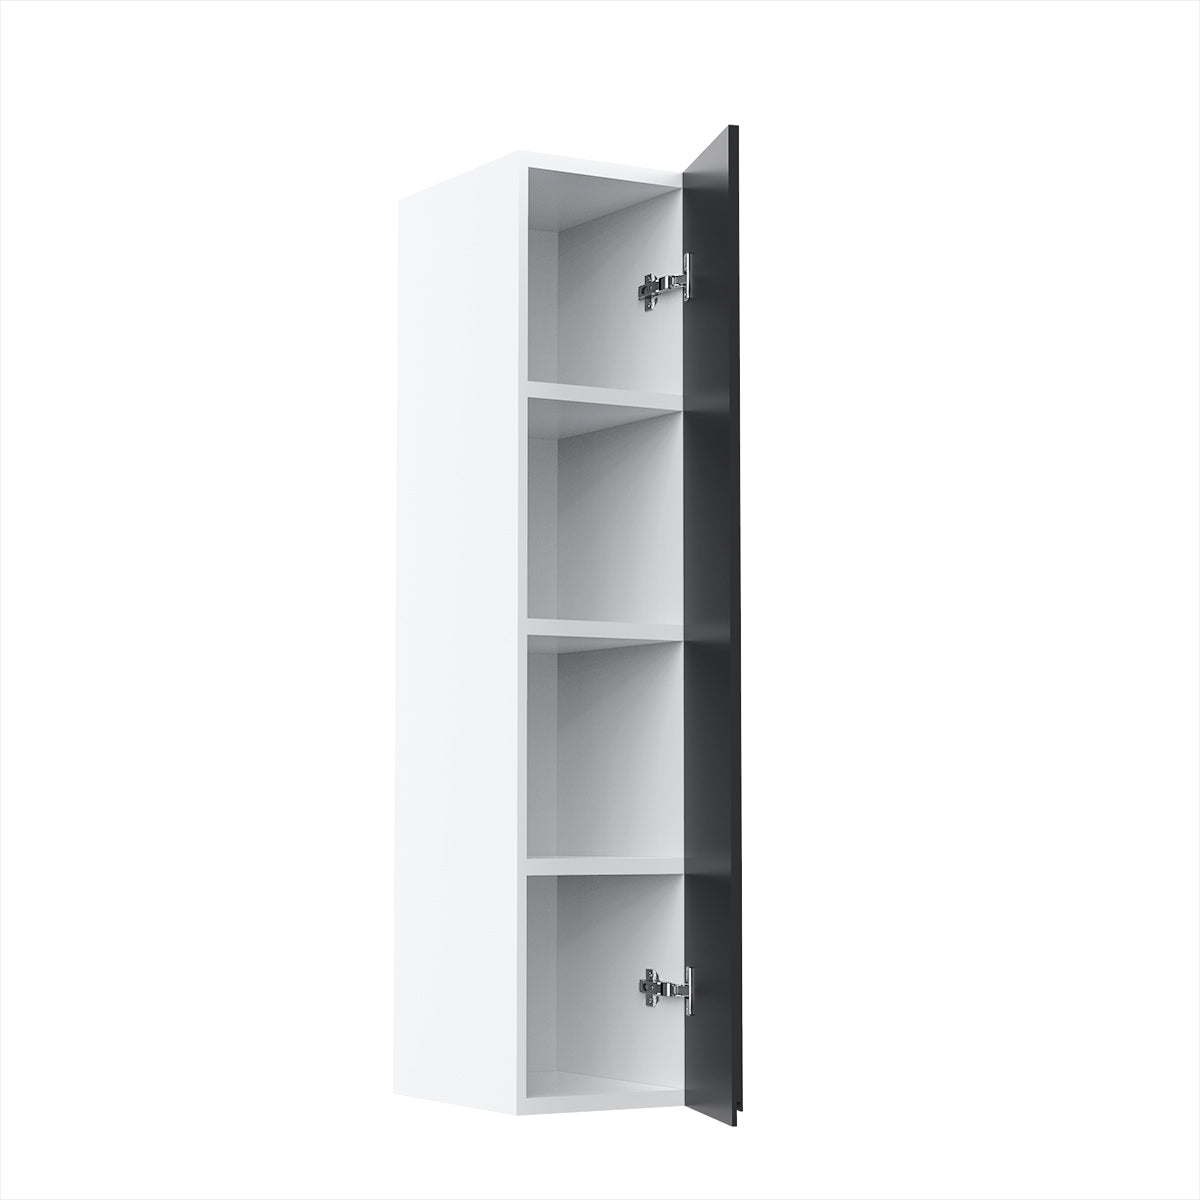 RTA - Lacquer Grey - Single Door Wall Cabinets | 9"W x 42"H x 12"D